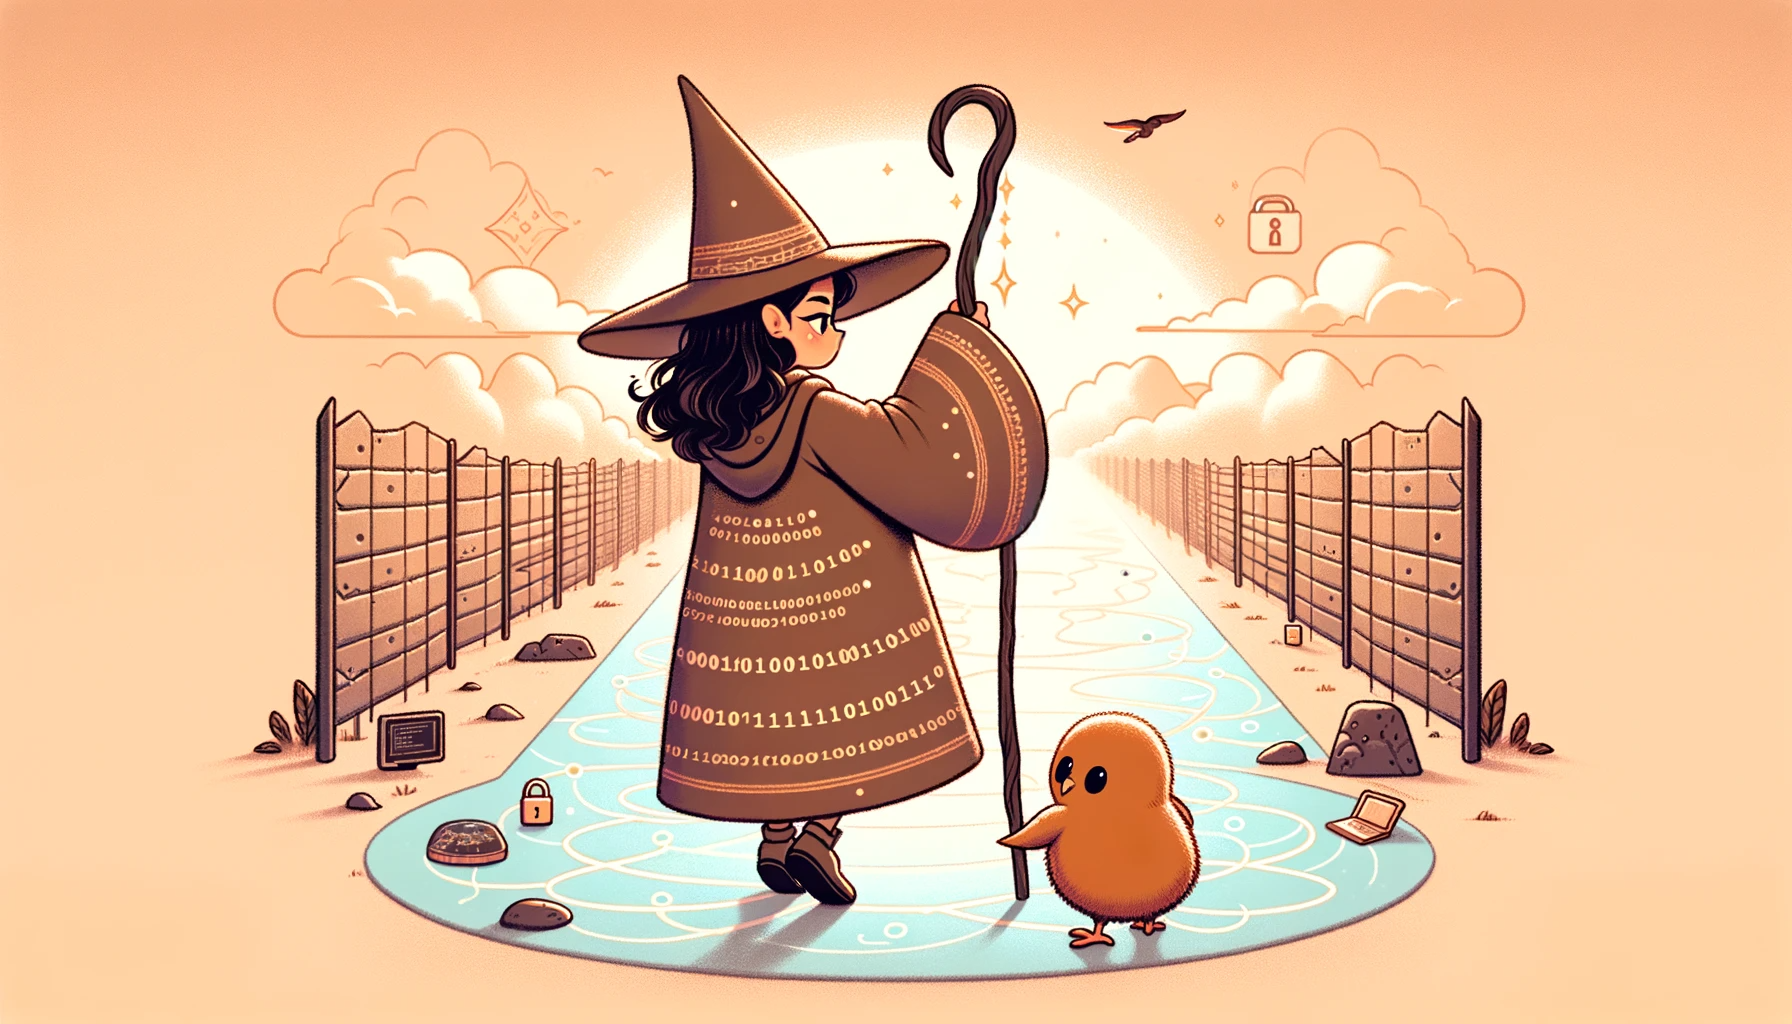 Illustrate a cute, coffee-colored fantasy scene with a female magician and a kiwi bird stepping onto a path symbolizing the journey into cybersecurity. The magician, a young woman of Middle-Eastern descent, should be dressed in a coffee-themed robe with subtle patterns of code and digital elements. She holds a staff that emits a soft, glowing light, resembling a firewall. The kiwi bird, adorable and inquisitive, looks up at her, as if ready to accompany her on this adventure. The path itself is woven with binary code and cybersecurity symbols, and it stretches into a horizon lined with towering firewalls and digital locks, representing the challenges and adventures ahead in the cybersecurity realm.